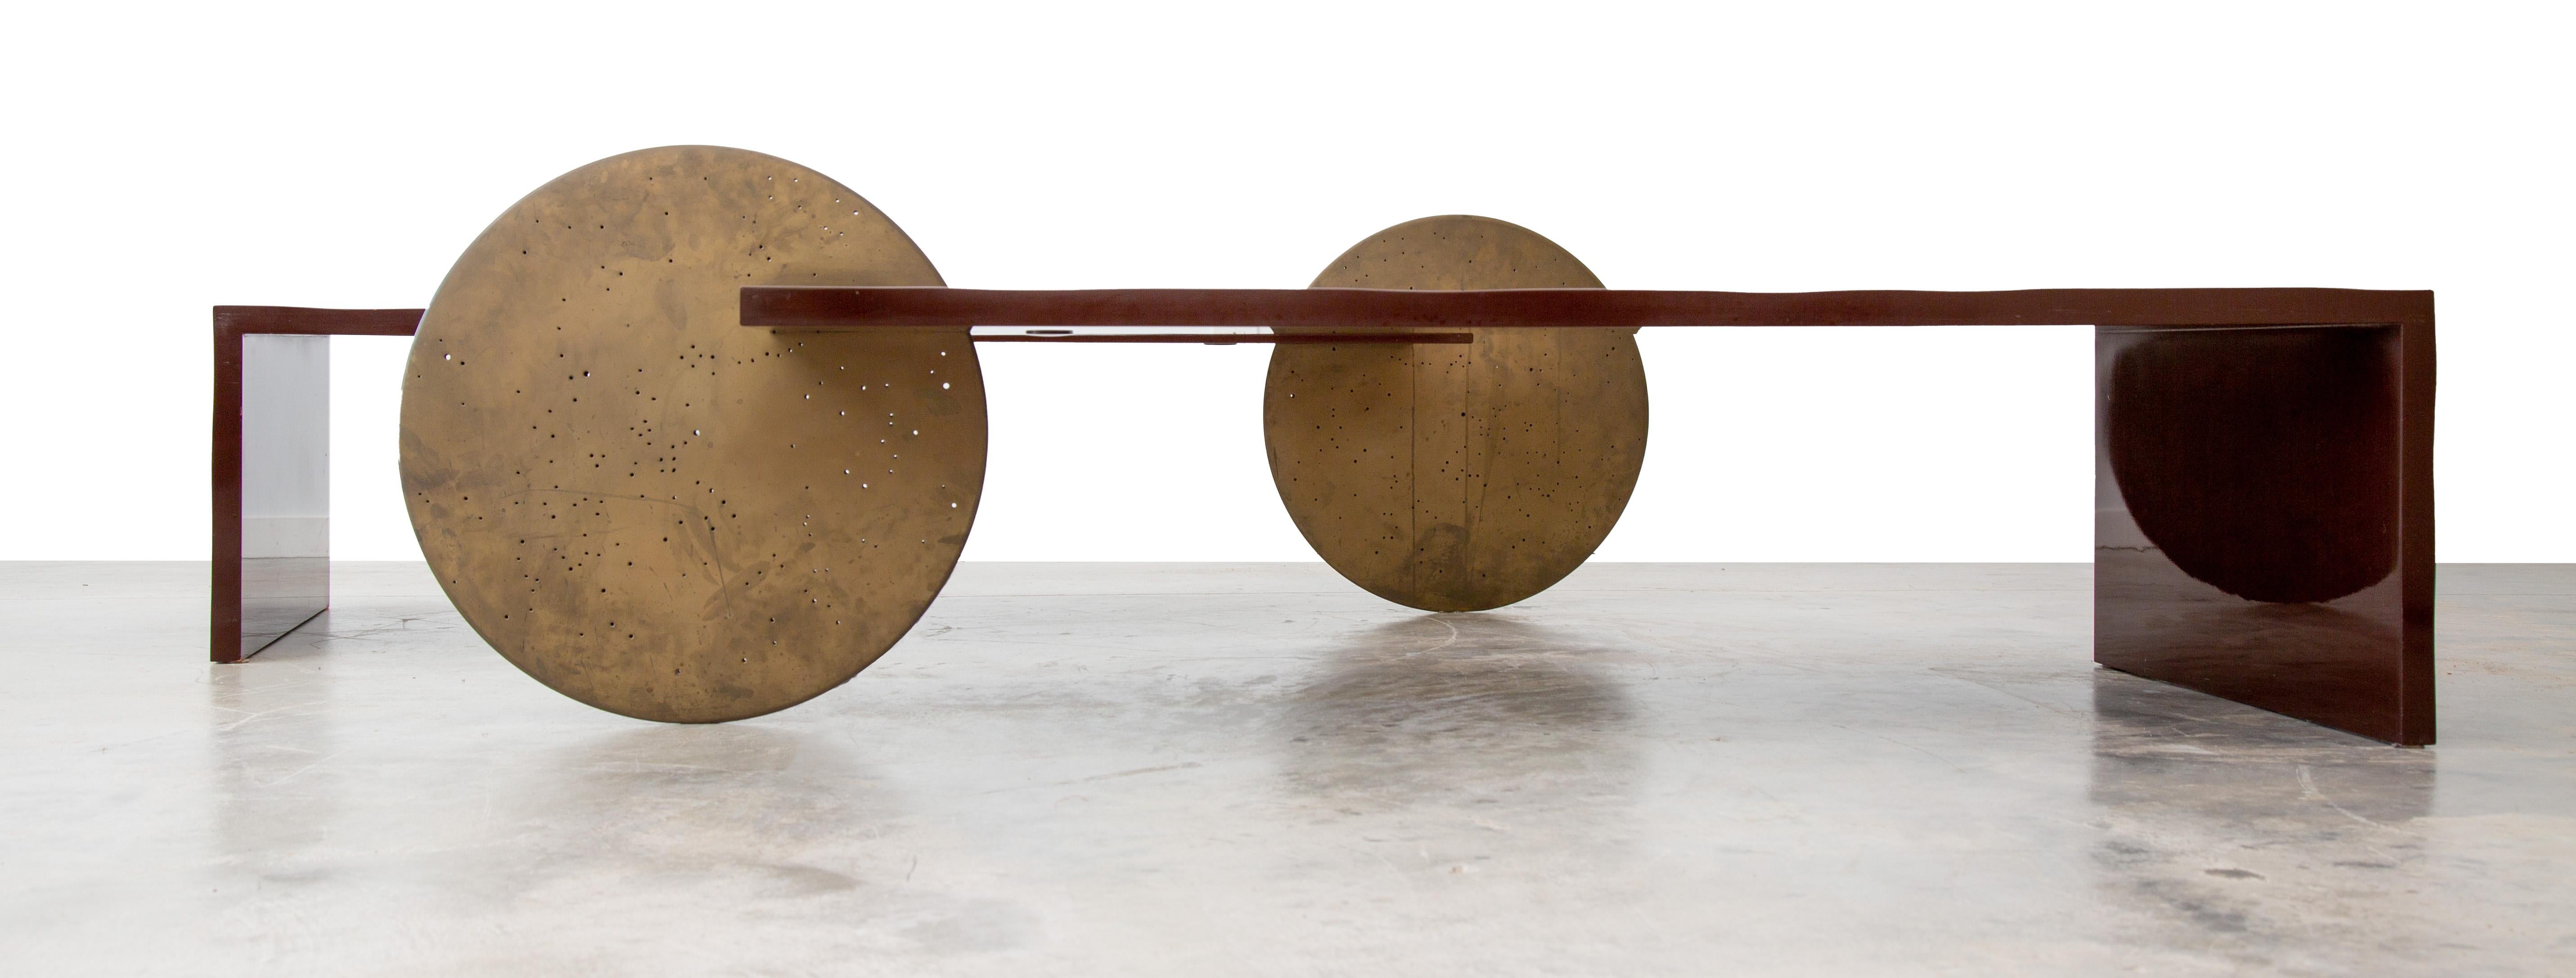 Borealis Table by Patrick Elie Naggar for Ralph Pucci 2003  Maroon and Brass For Sale 3